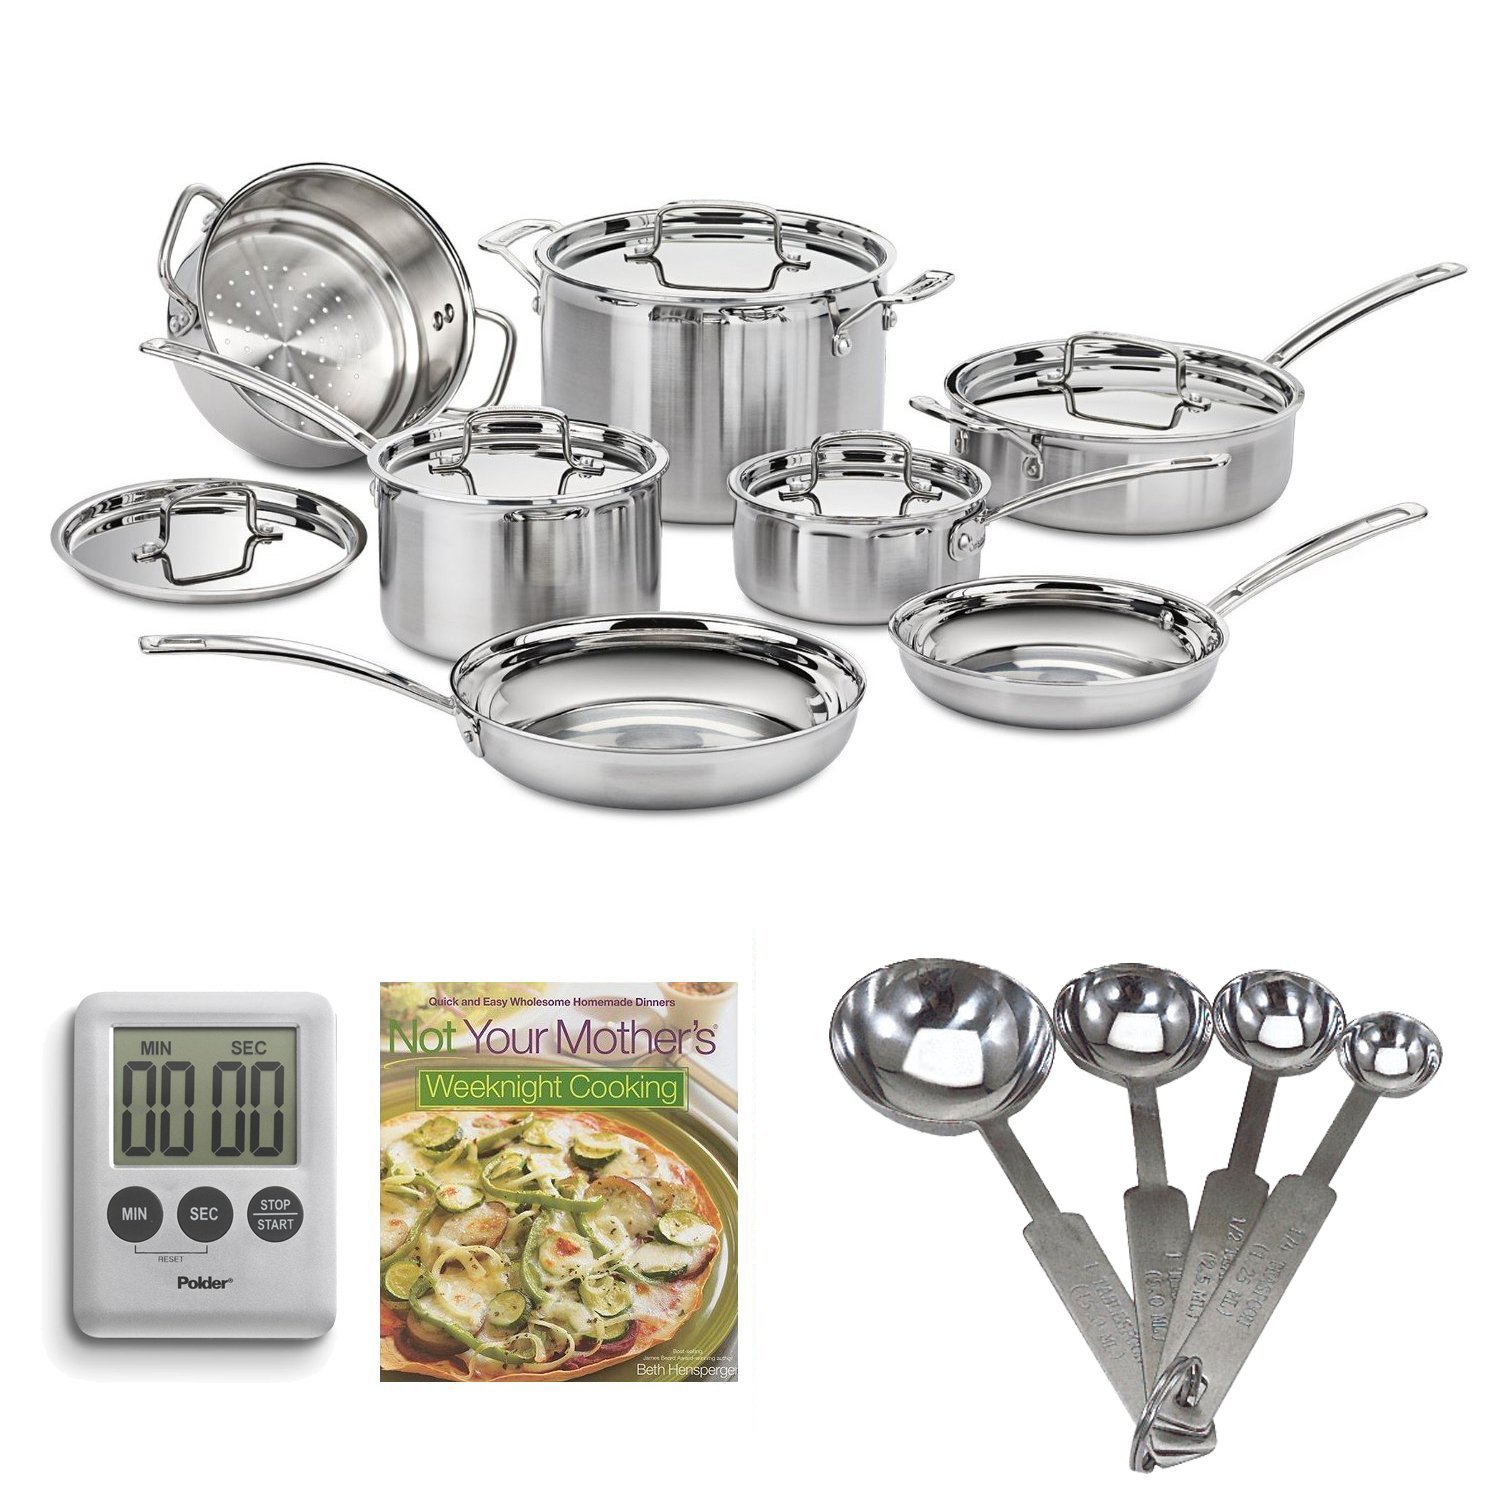 Cuisinart MCP-12N MultiClad Pro Stainless Steel 12-Piece Cookware Set with Stainless Steel Measuring Spoon Set, 100-Minute Timer and Not Your Mother's Weeknight Cooking